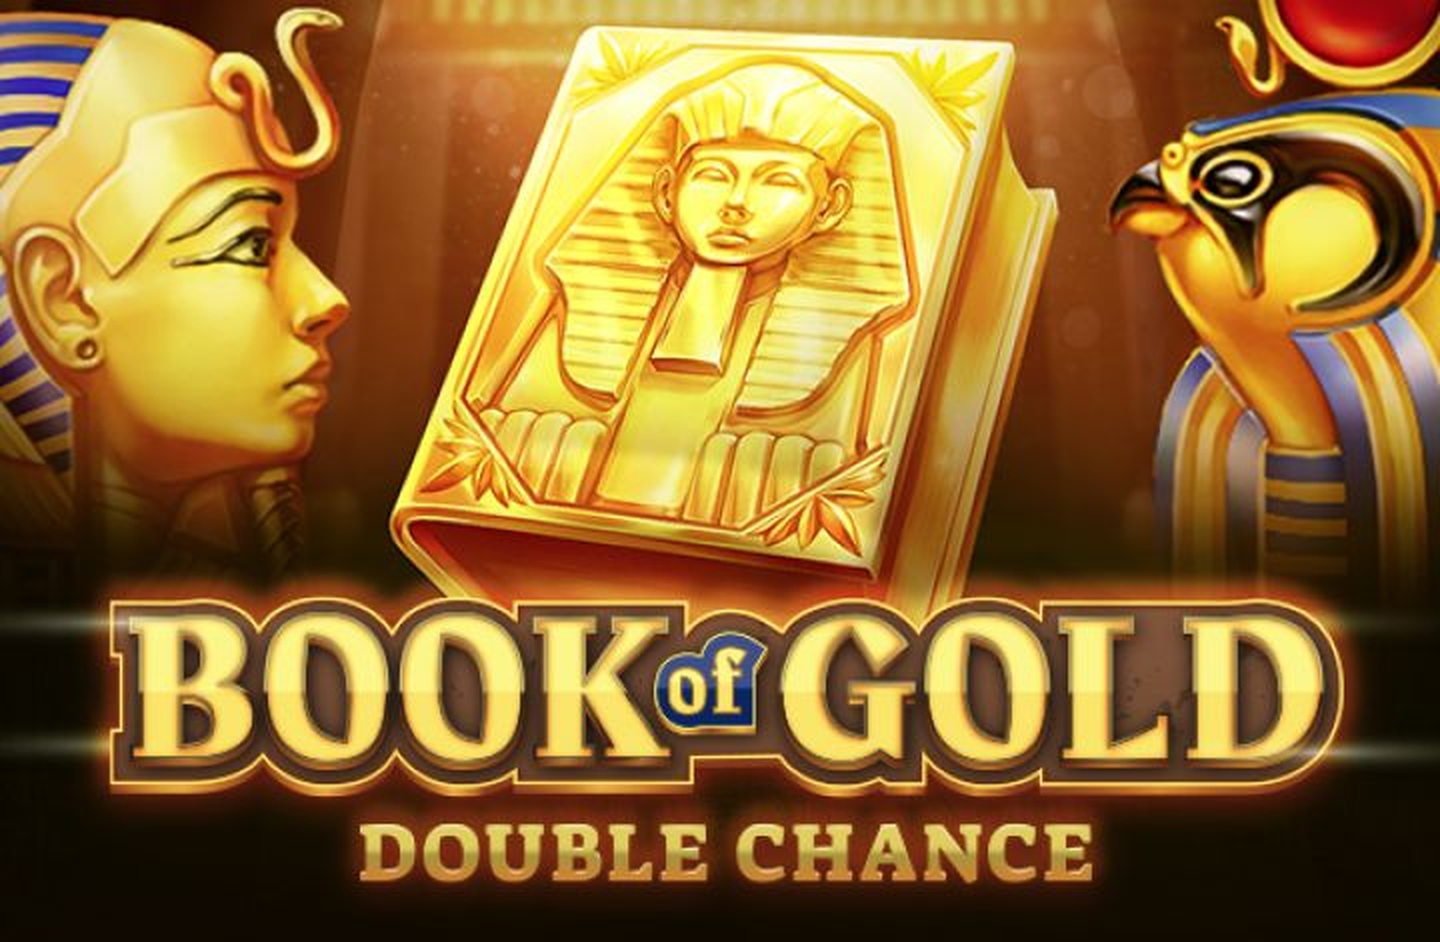 The Book of Gold: Double Chance Online Slot Demo Game by Playson